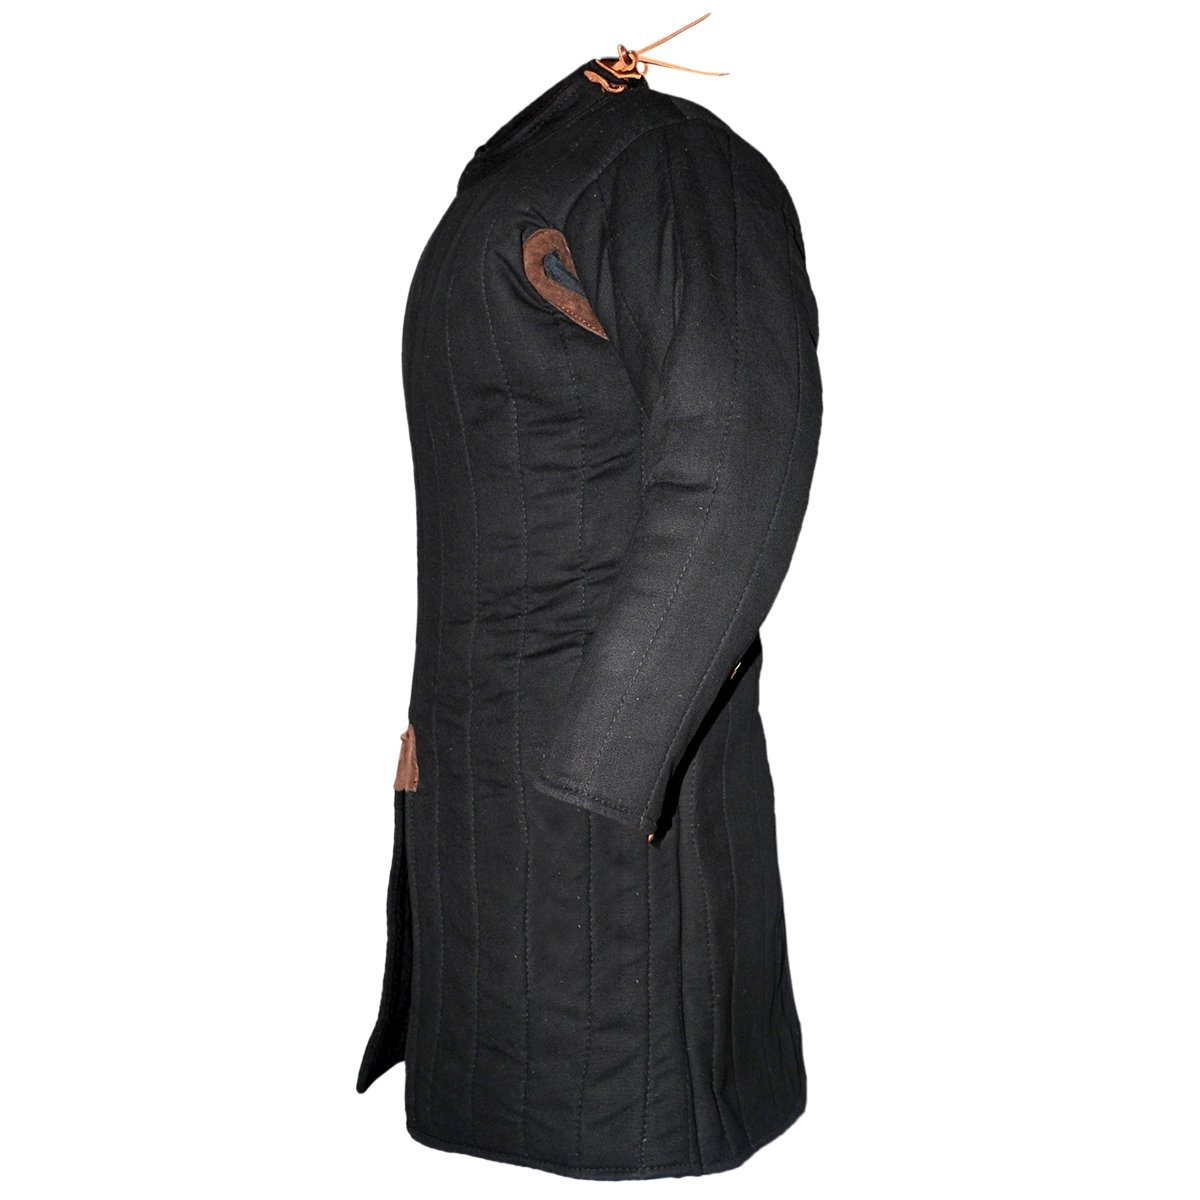 Closed Gambeson Late 12th C./Early 13th C., Black Size M